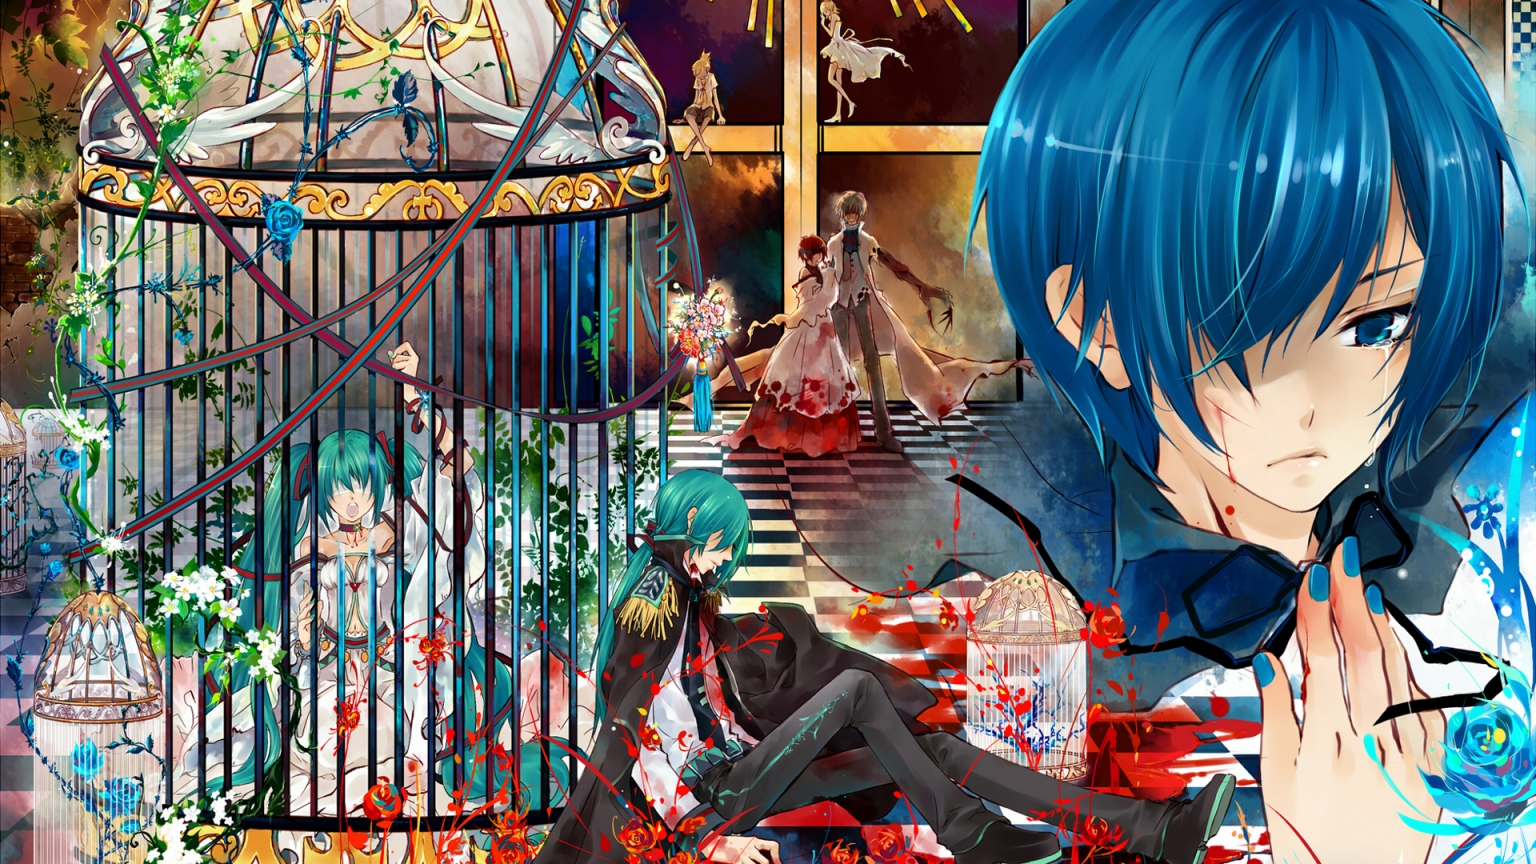 Vocaloid Kaito for 1536 x 864 HDTV resolution